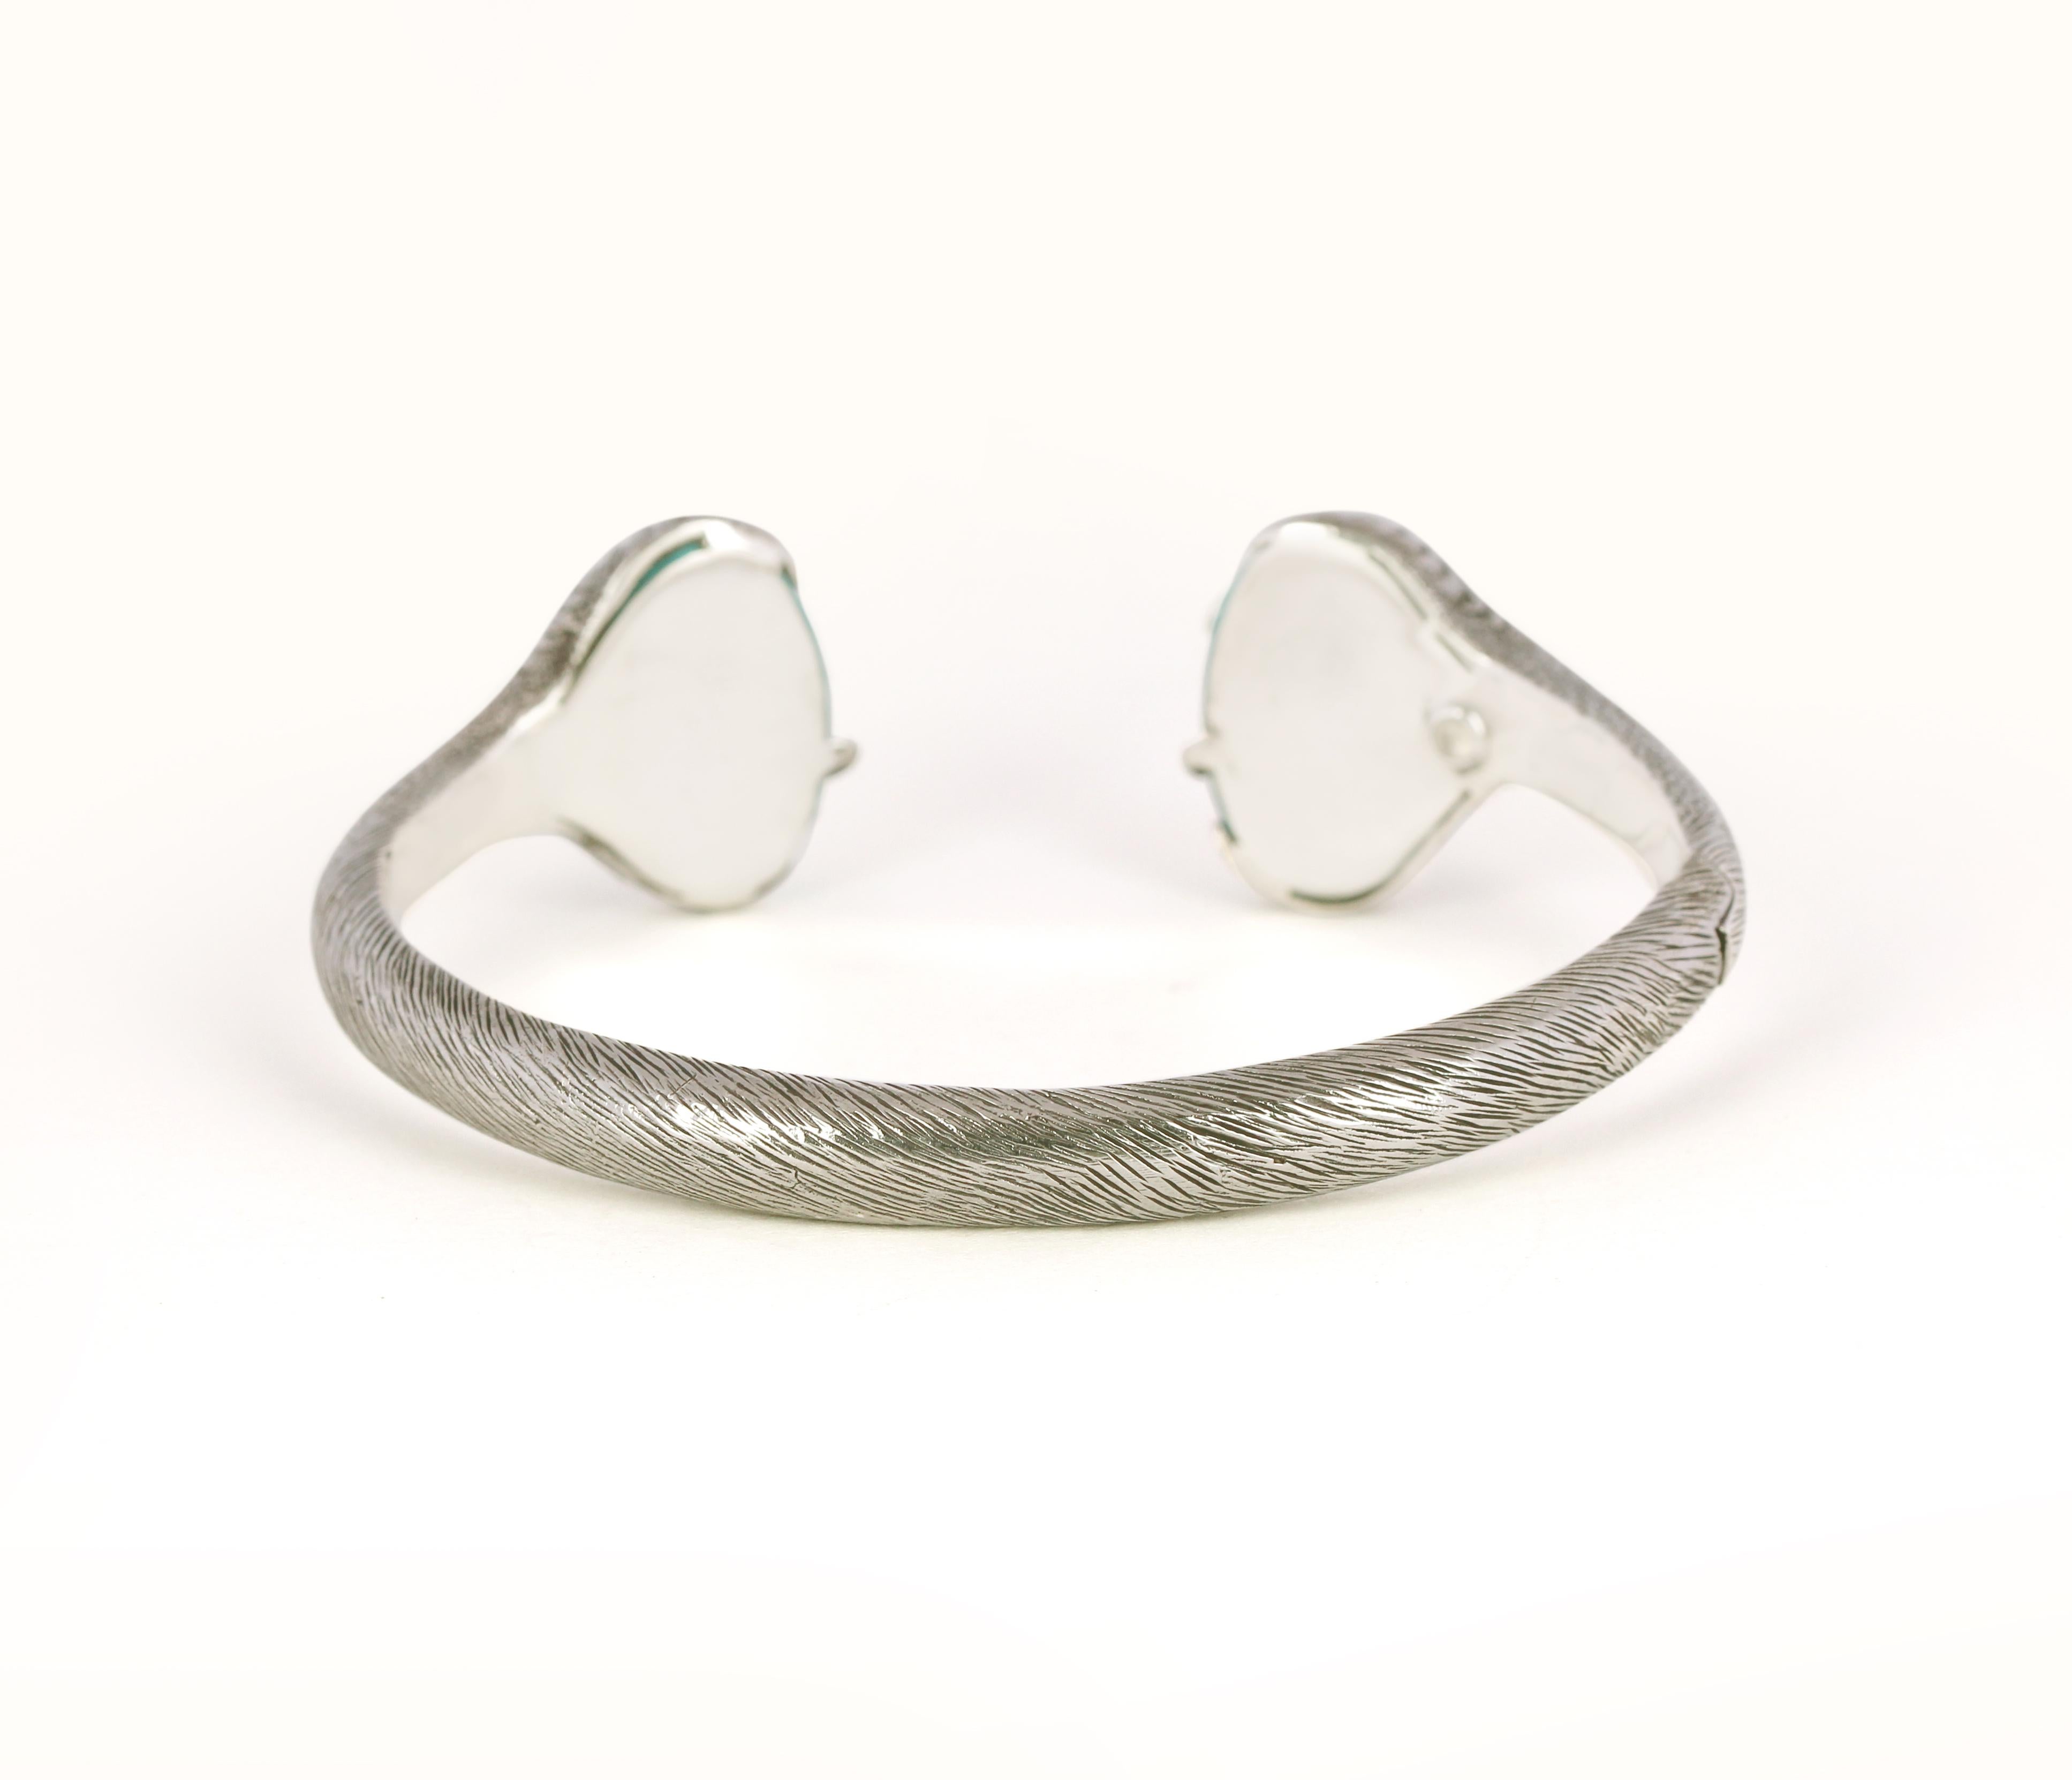 Artisan Tichu Turquoise Eagle Claw Cuff in Sterling Sliver and Crystal Quartz 'Size S' For Sale